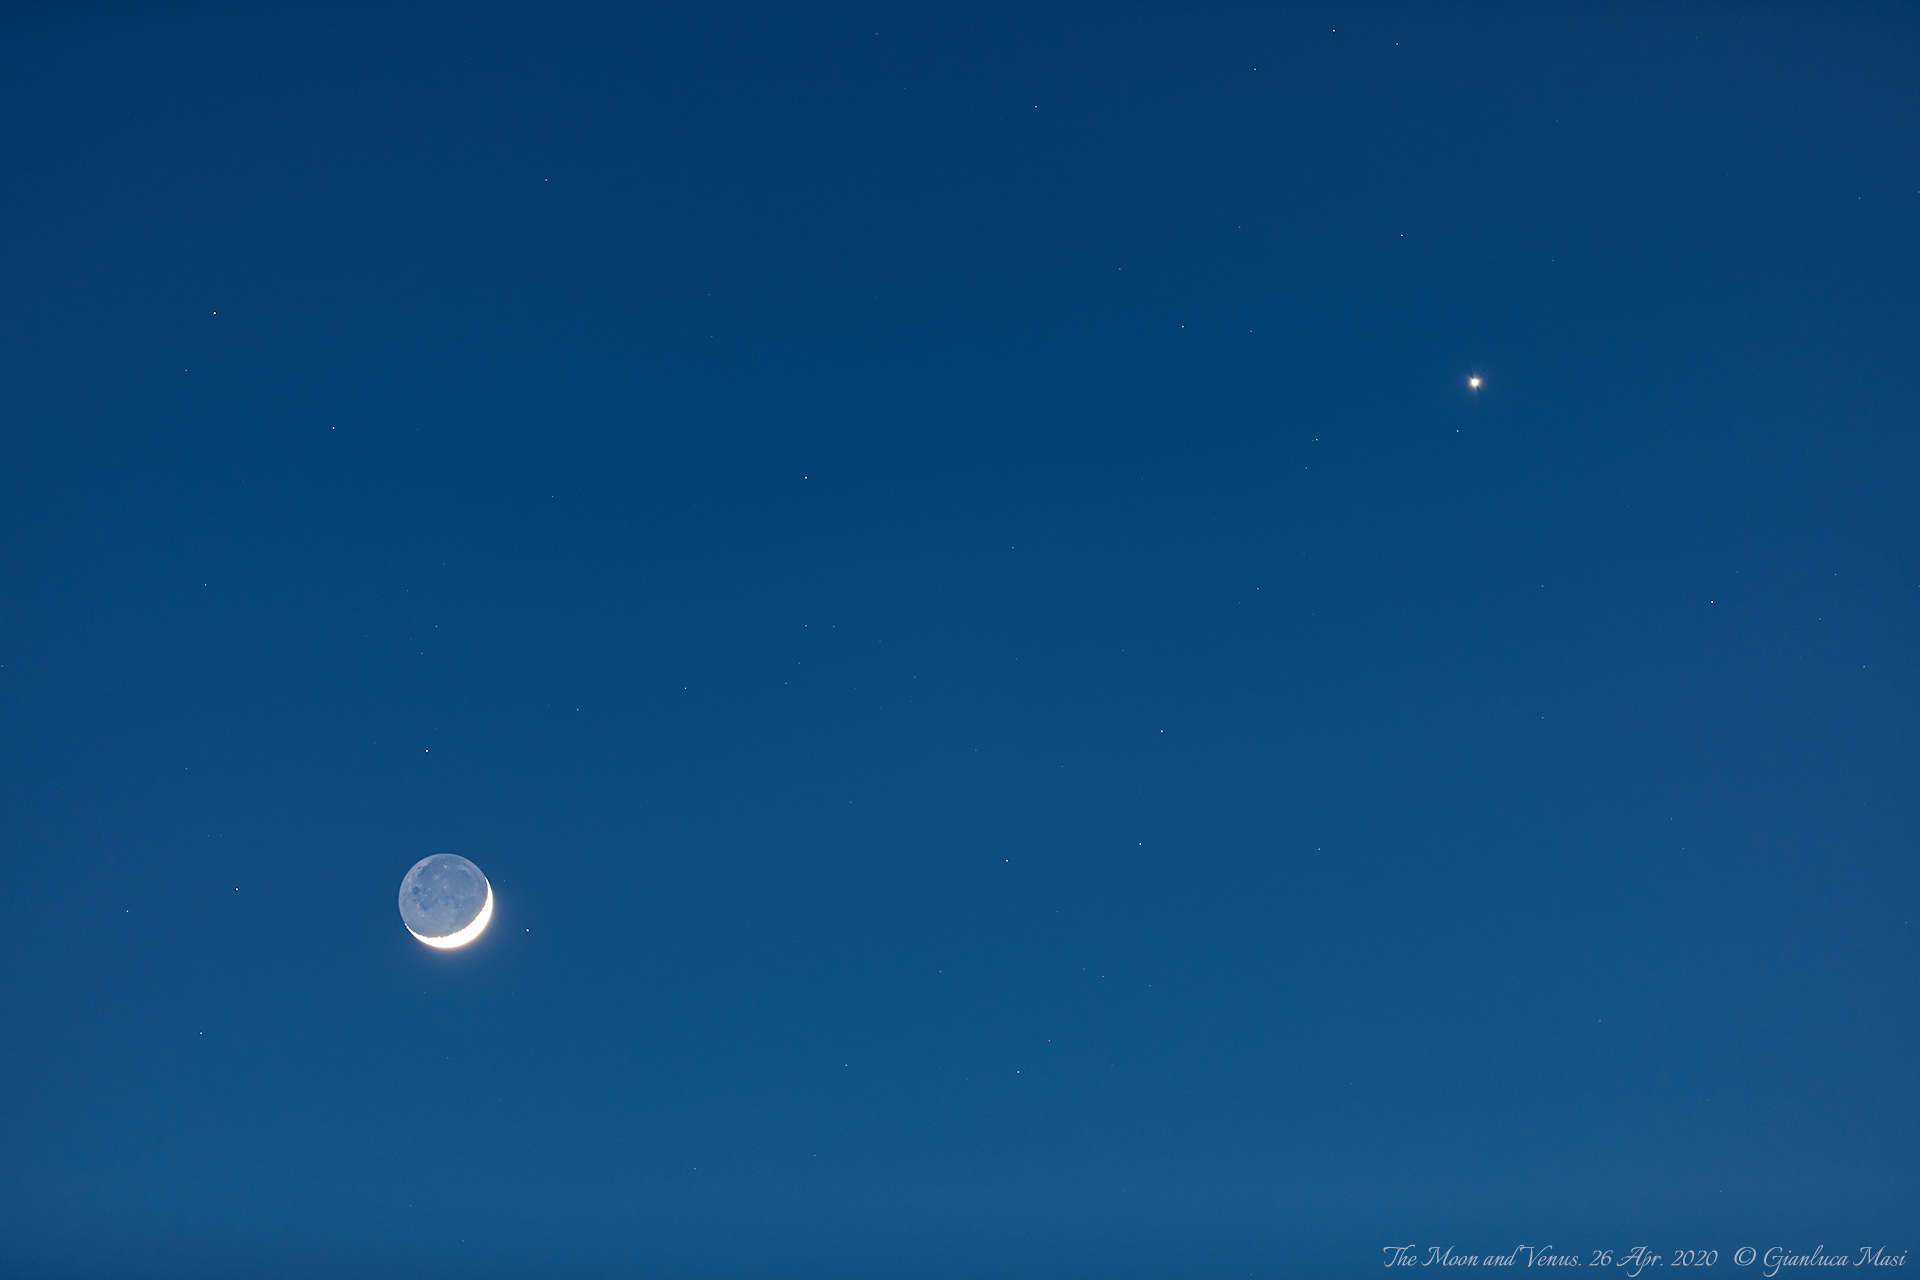 The Moon and planet Venus. 26 Apr. 2020